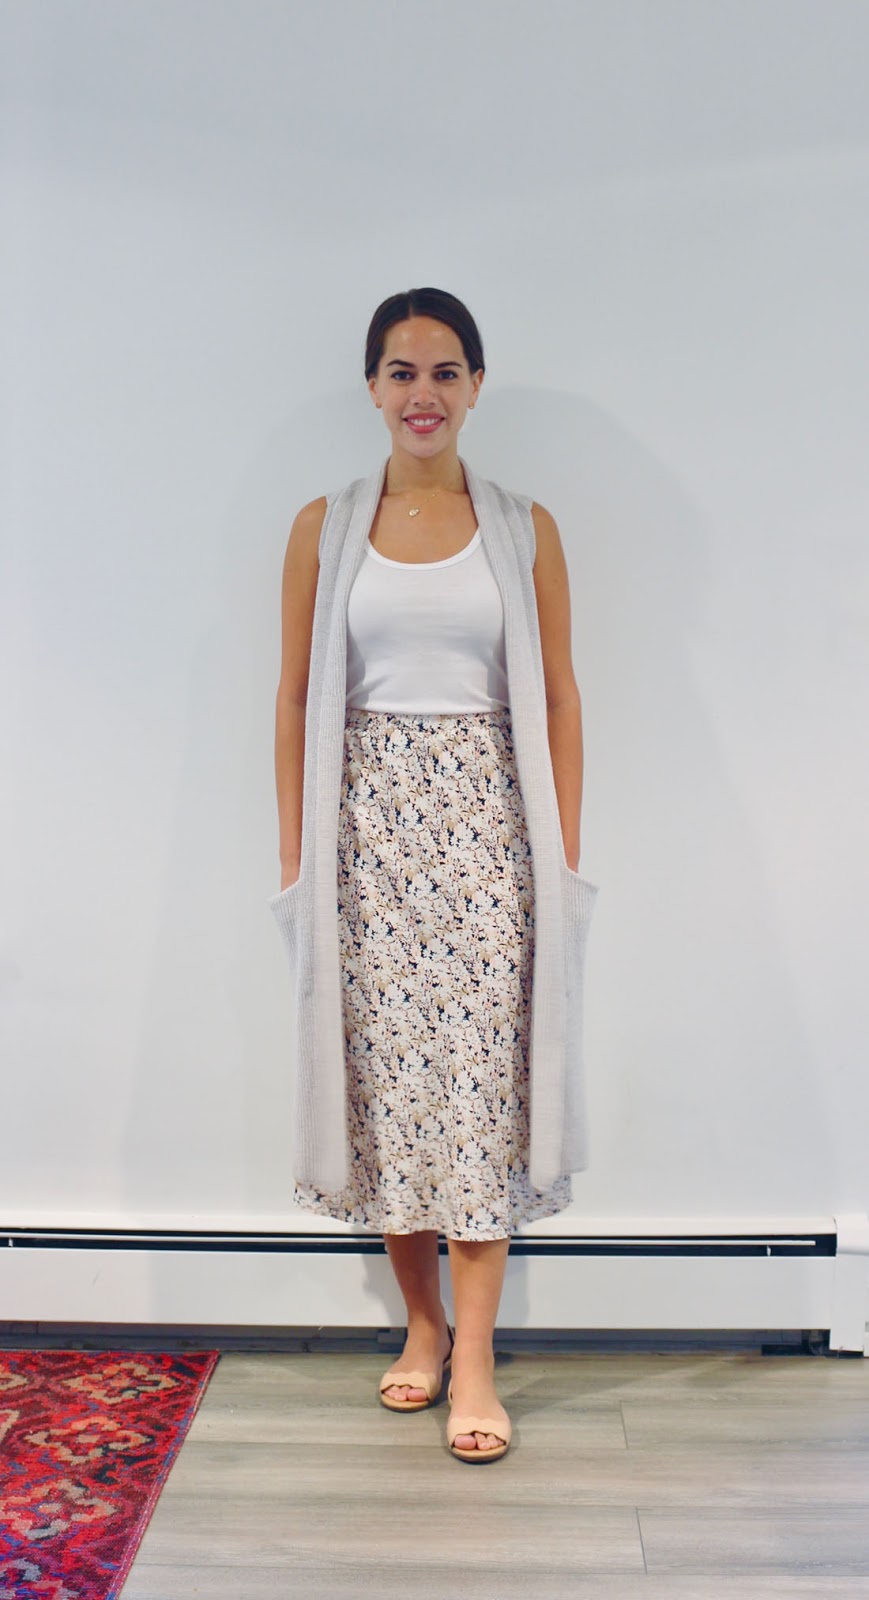 Jules in Flats -  Floral Print Midi Skirt with Tank & Sweater Vest (Business Casual Summer Workwear on a Budget) 